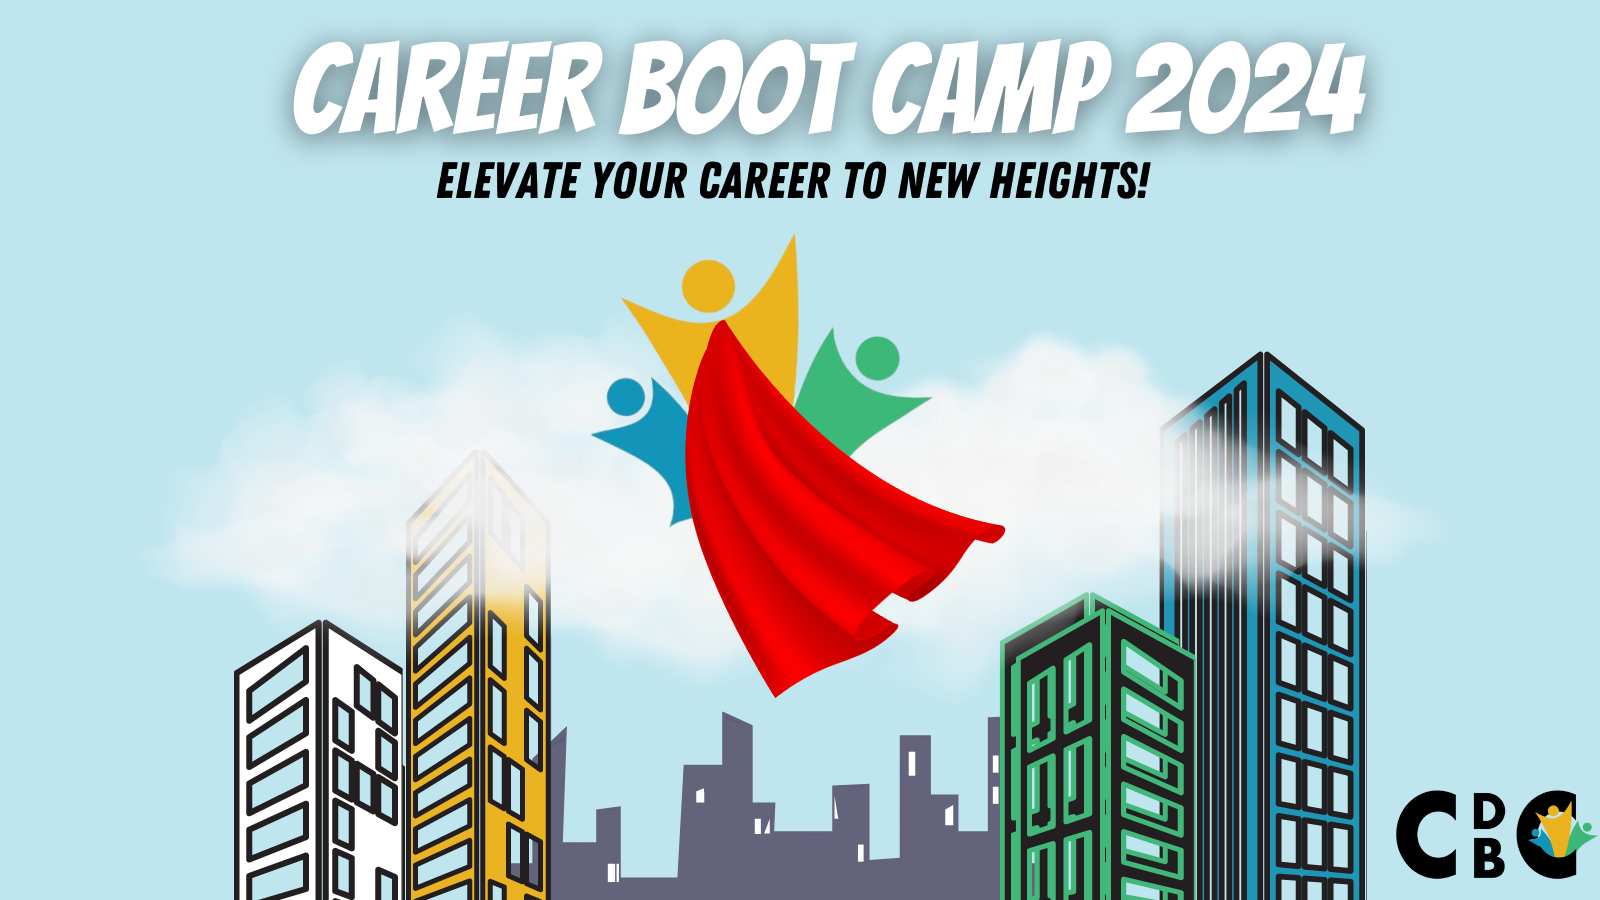 Career Booth Camp 2024: Elevate Your Career to New Heights!